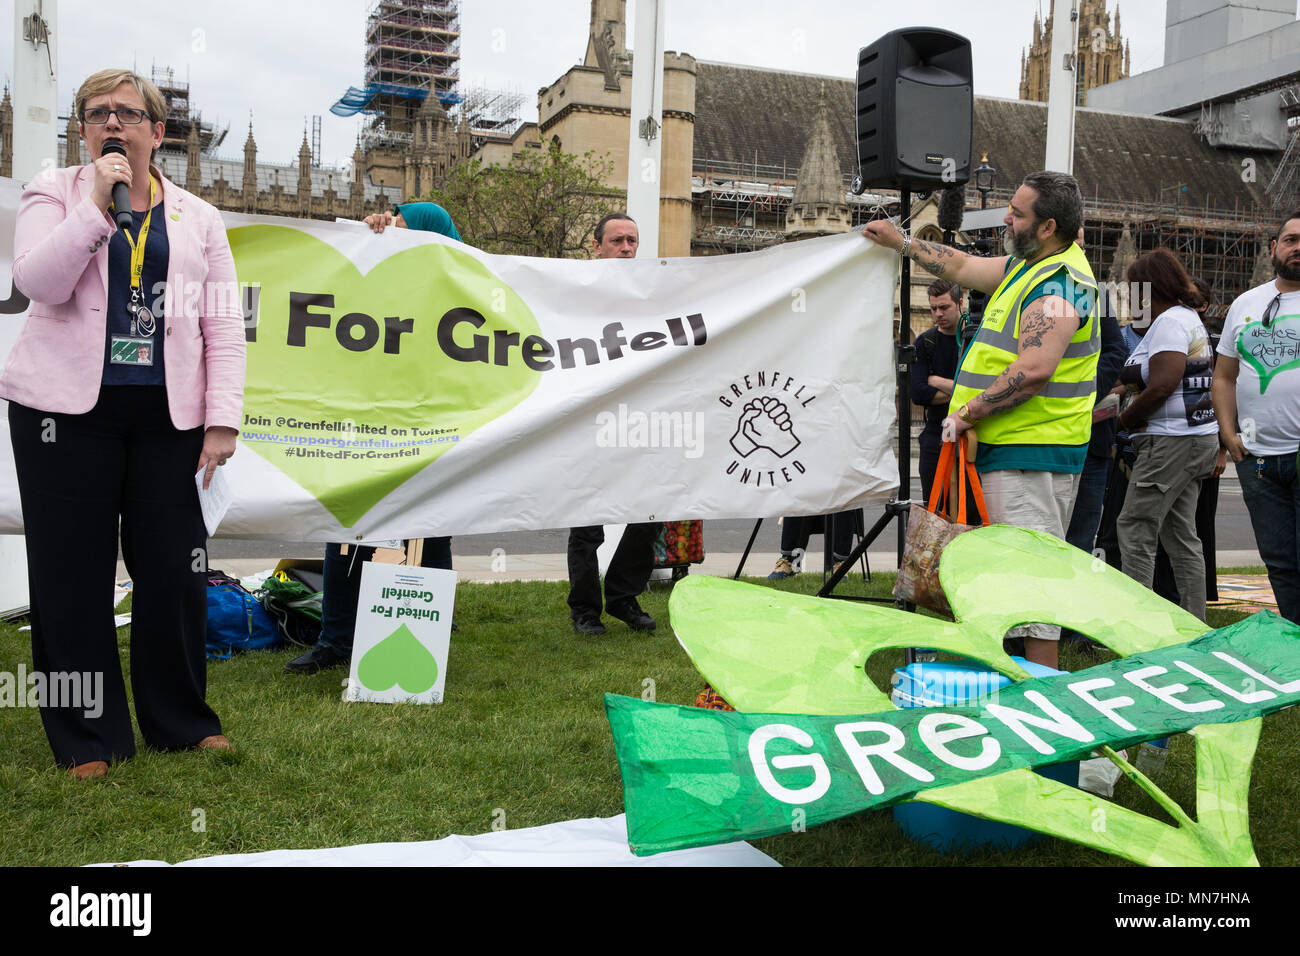 London, UK. 14th May, 2018. Joanna Cherry QC, SNP MP for Edinburgh South West, addresses Grenfell United Survivors, bereaved families and the community of Grenfell at a rally outside the Houses of Parliament on the 11th anniversary of the fire to urge the Prime Minister to accept their petition to appoint a panel of decision making experts to sit alongside Sir Martin Moore-Bick in the Grenfell Tower Public Inquiry.  The rally was timed to coincide with the debating of the petition in Parliament. Credit: Mark Kerrison/Alamy Live News Stock Photo